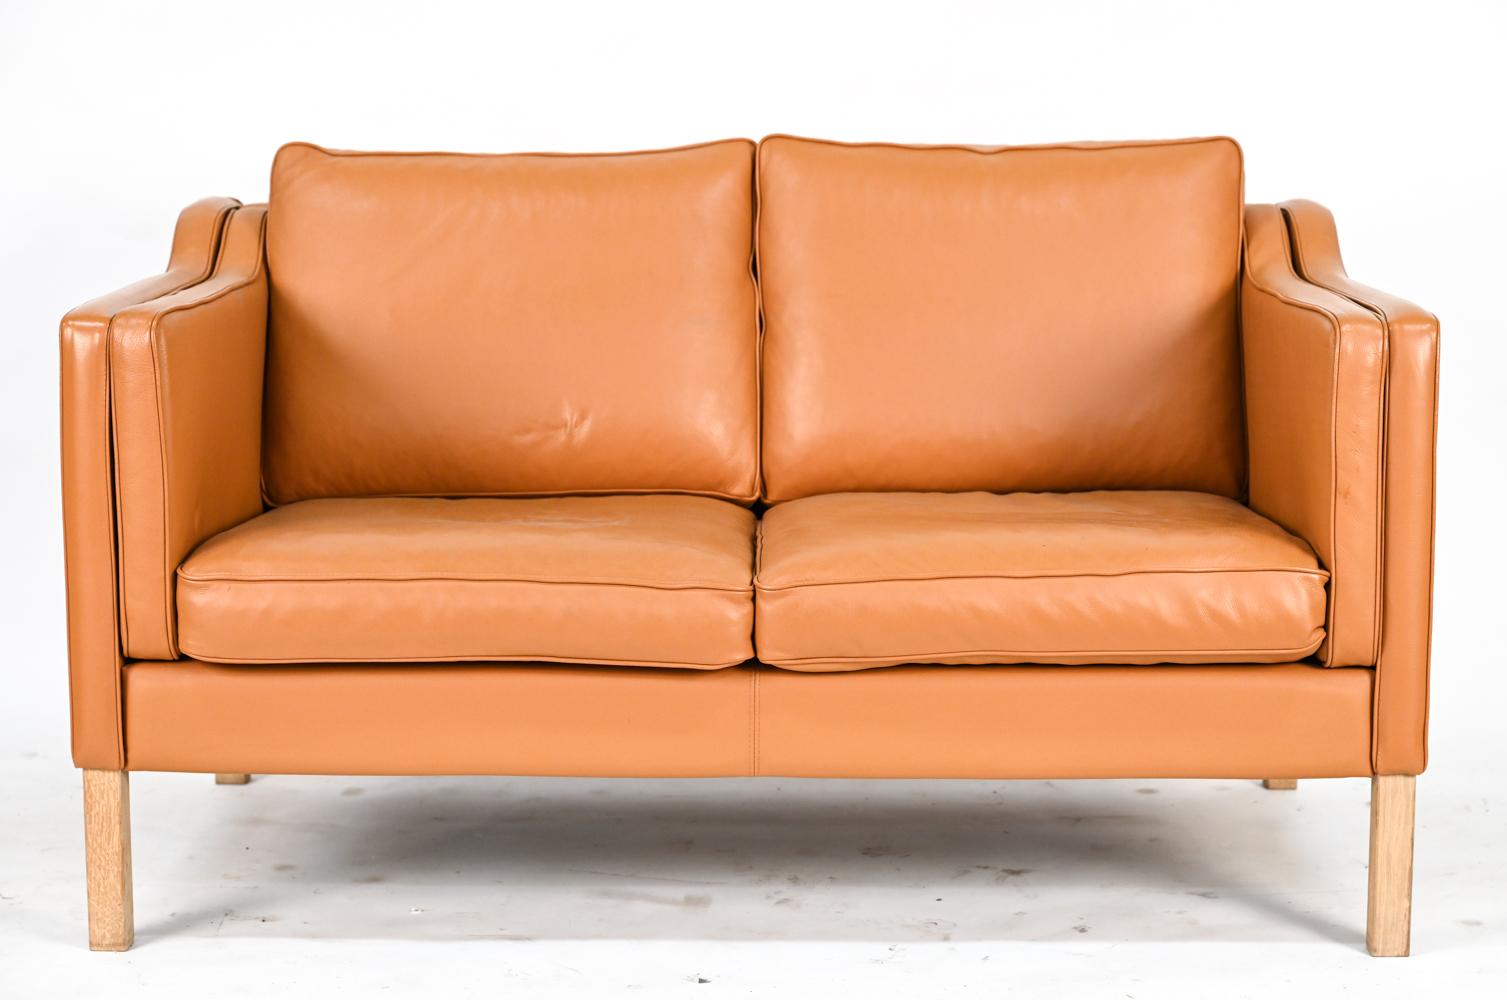 A Danish mid-century sofa suite comprised of a three-seater sofa and two-seater loveseat upholstered in handsomely patinated brandy leather. In the manner of iconic Scandinavian designer Borge Mogensen.